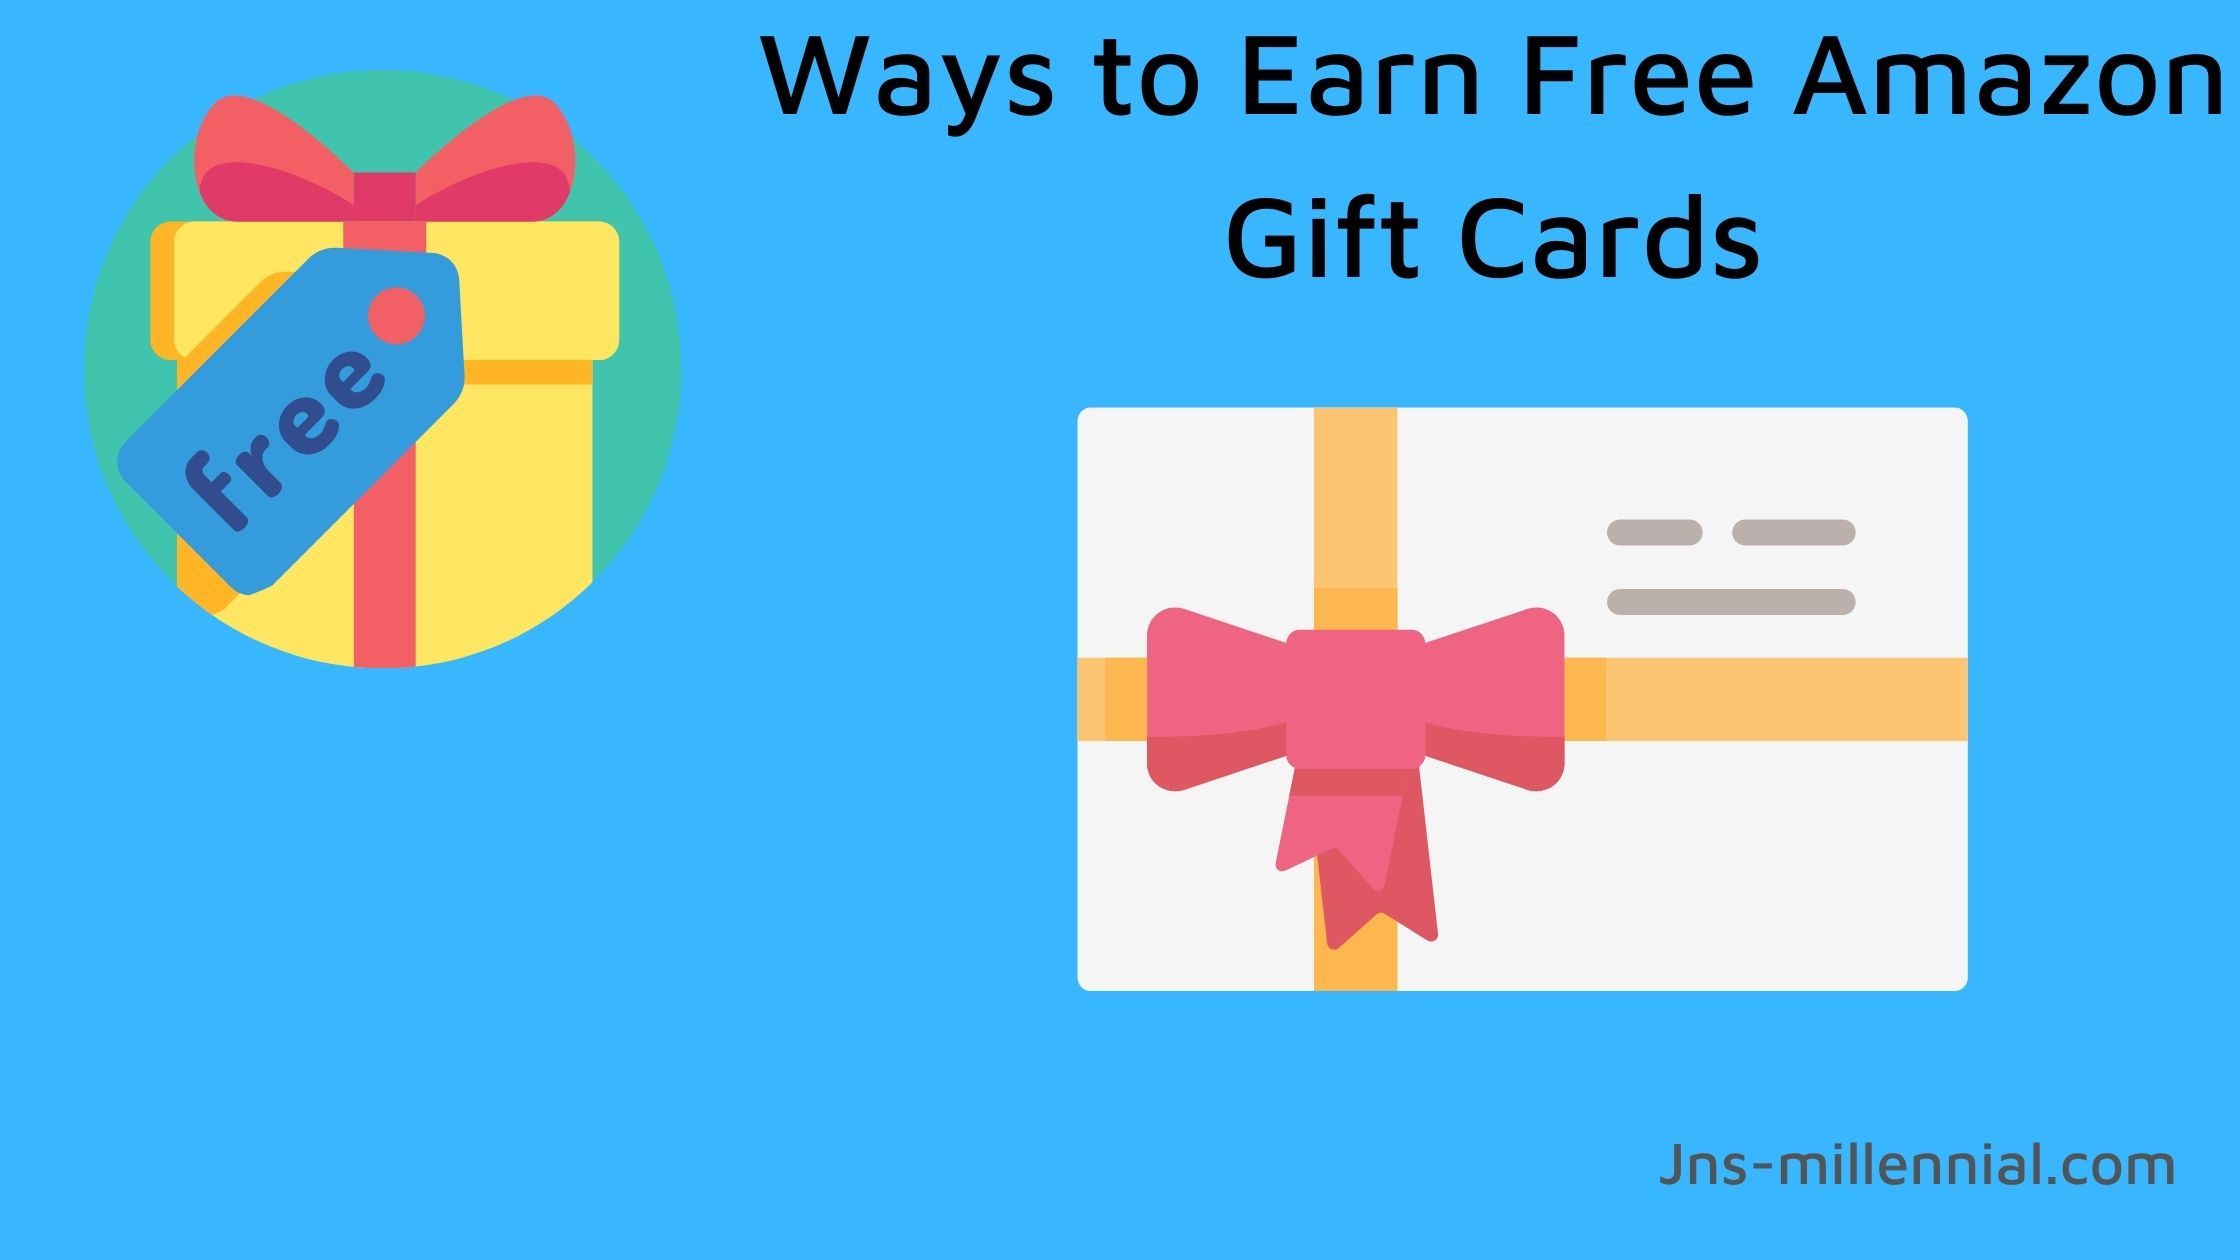 Ways to Earn Free Amazon Gift Cards